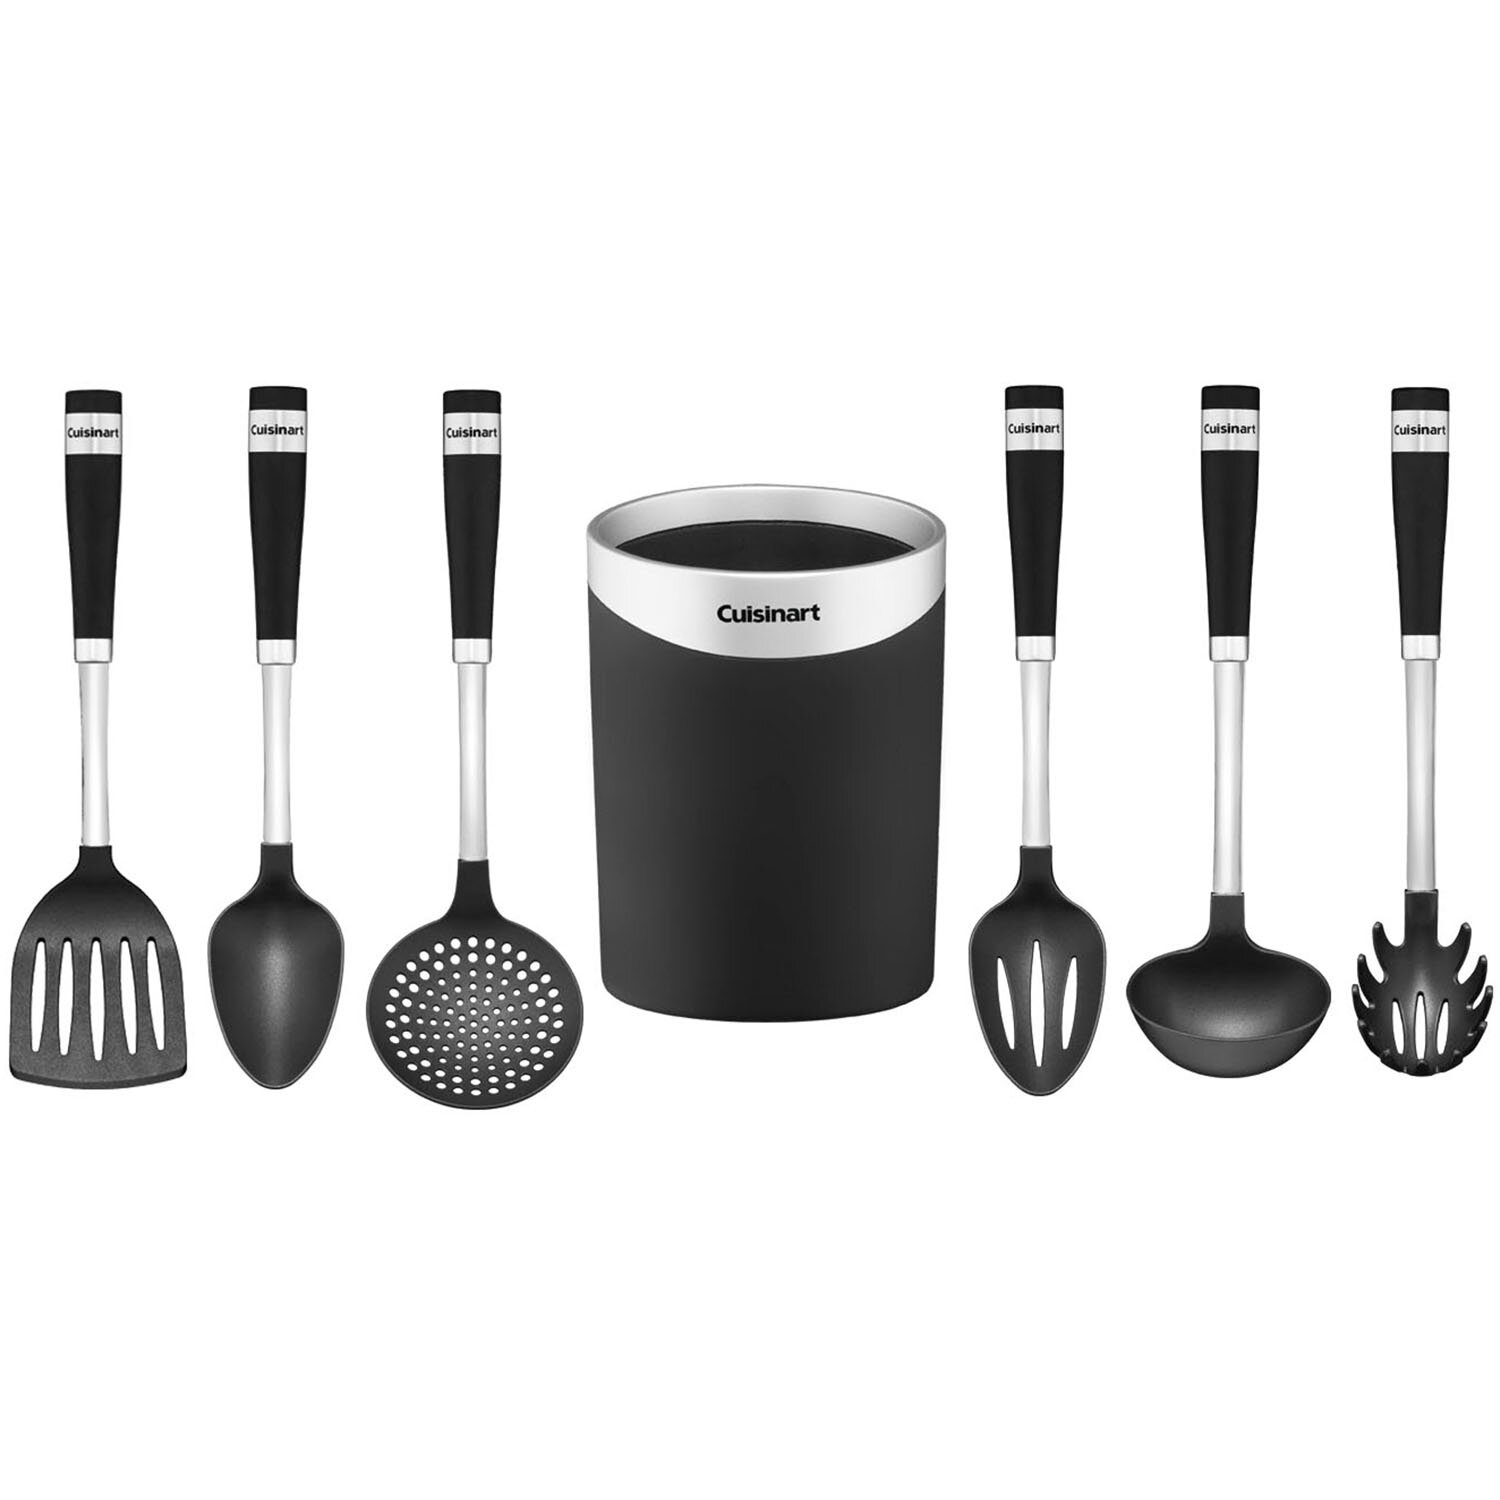 1790 Stainless Steel Kitchen Utensil Set 25 Cooking Utensils Ideal for College Students Tool Set Gift Nonstick Utensils Cookware Set with Spatula 